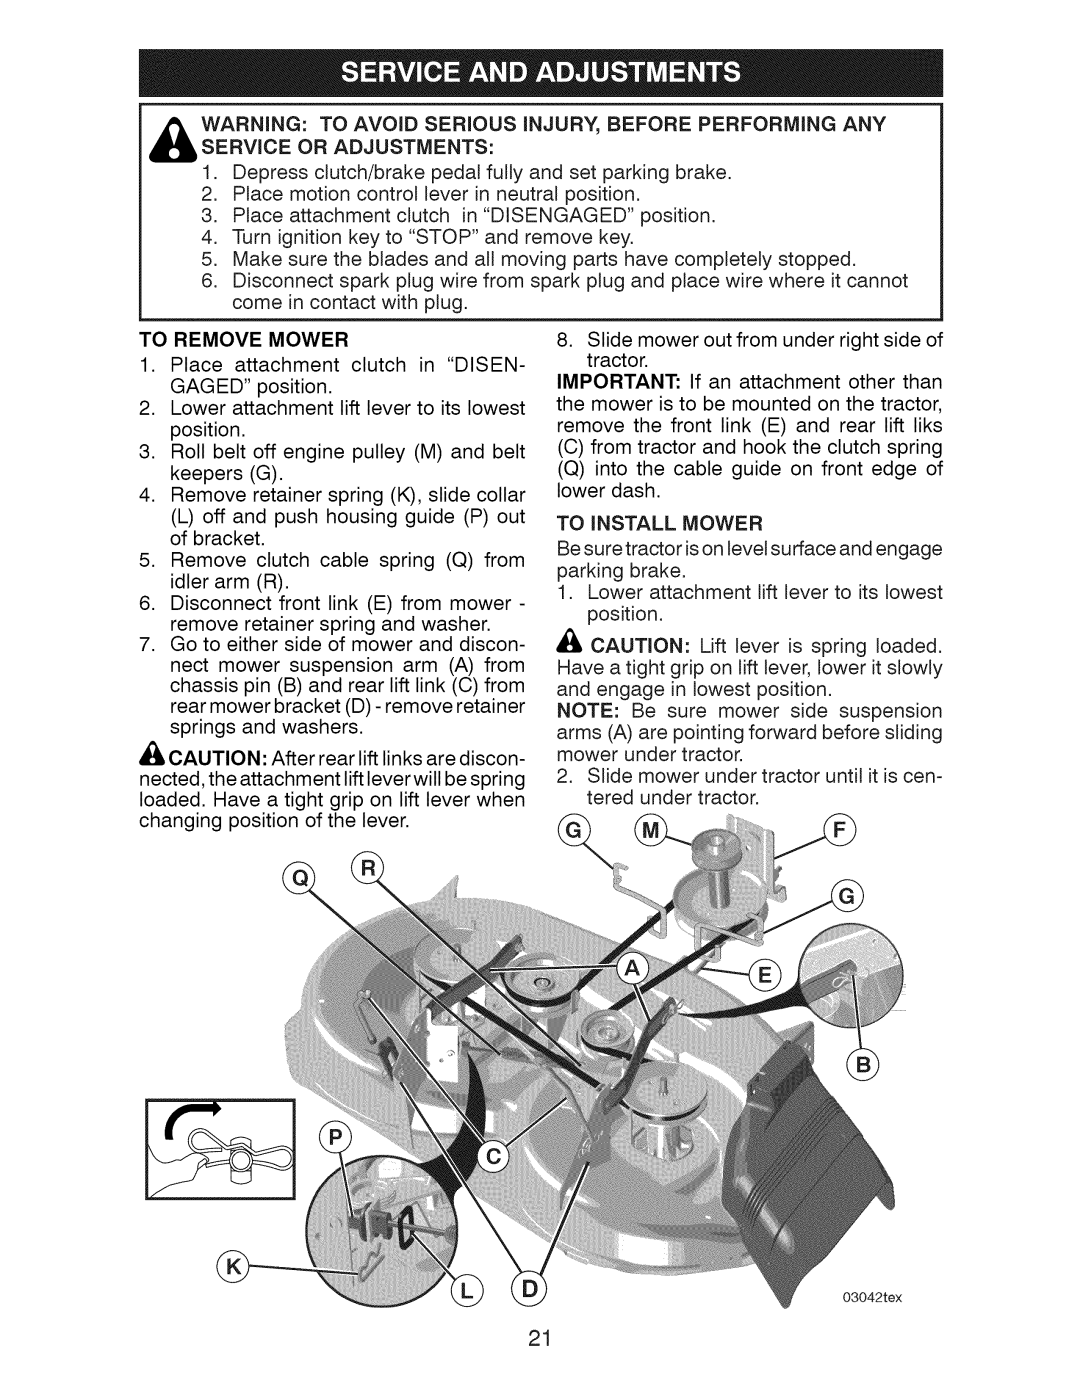 Craftsman 917.289240 owner manual To Remove Mower, To Install Mower 